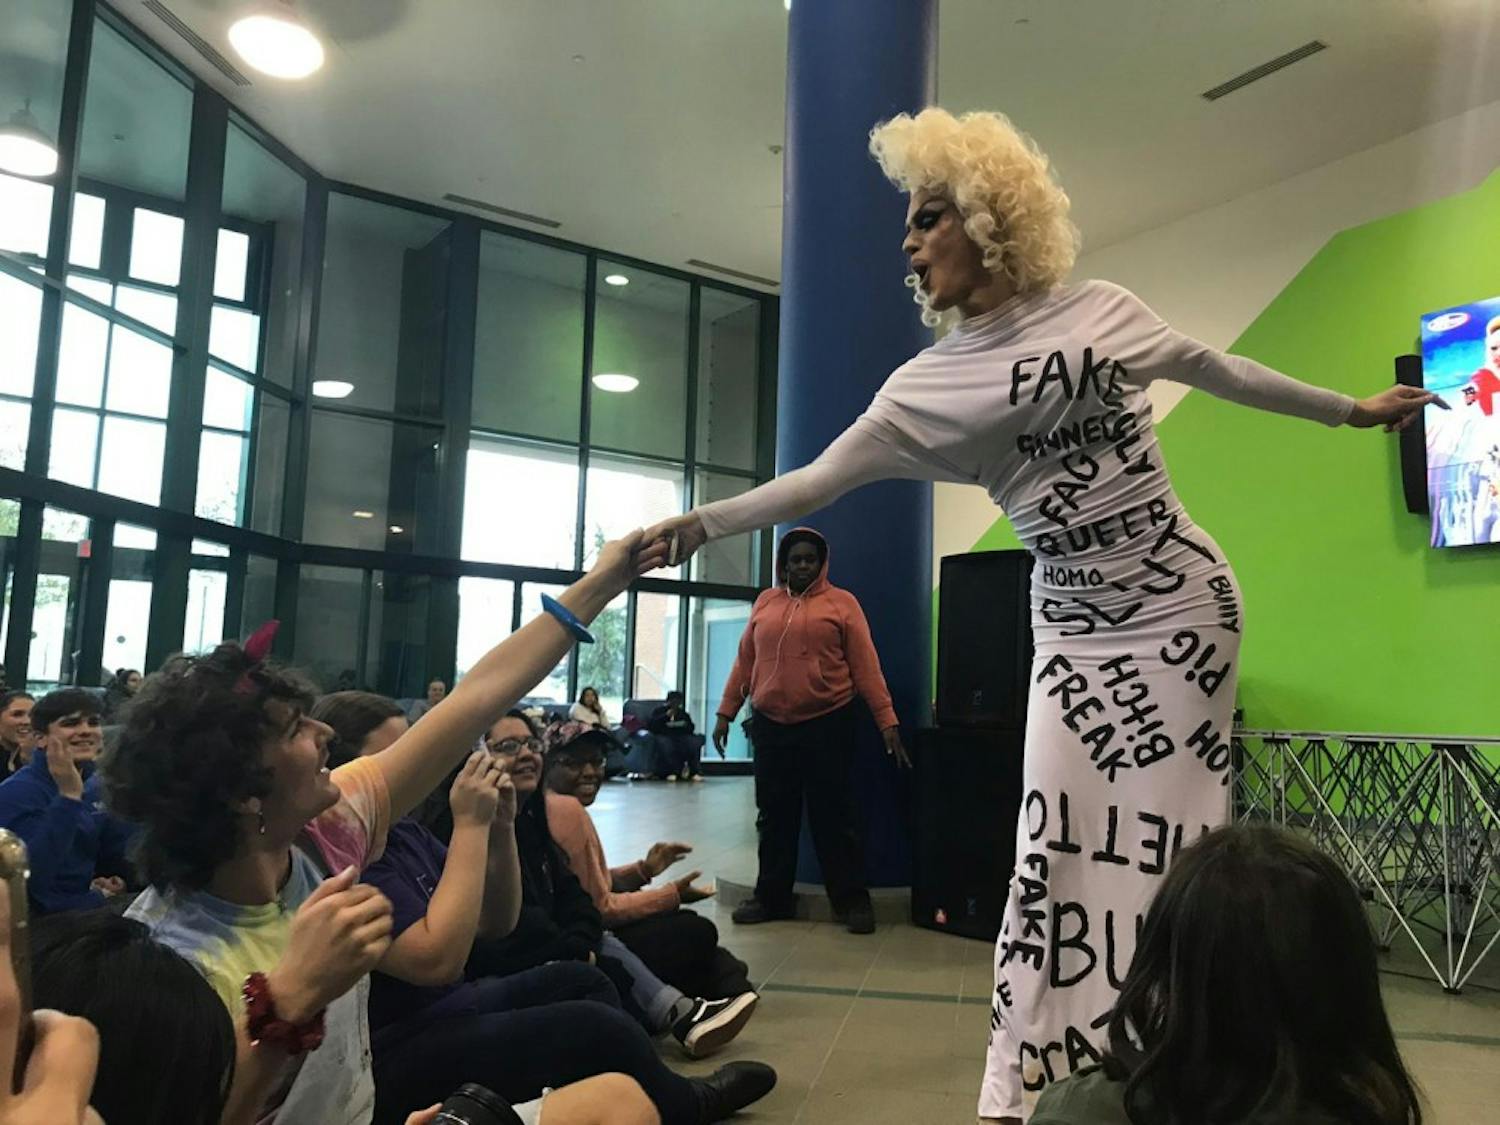 Drag queen Alice Raige answered questions from students during the Q&amp;A portion of the drag show.